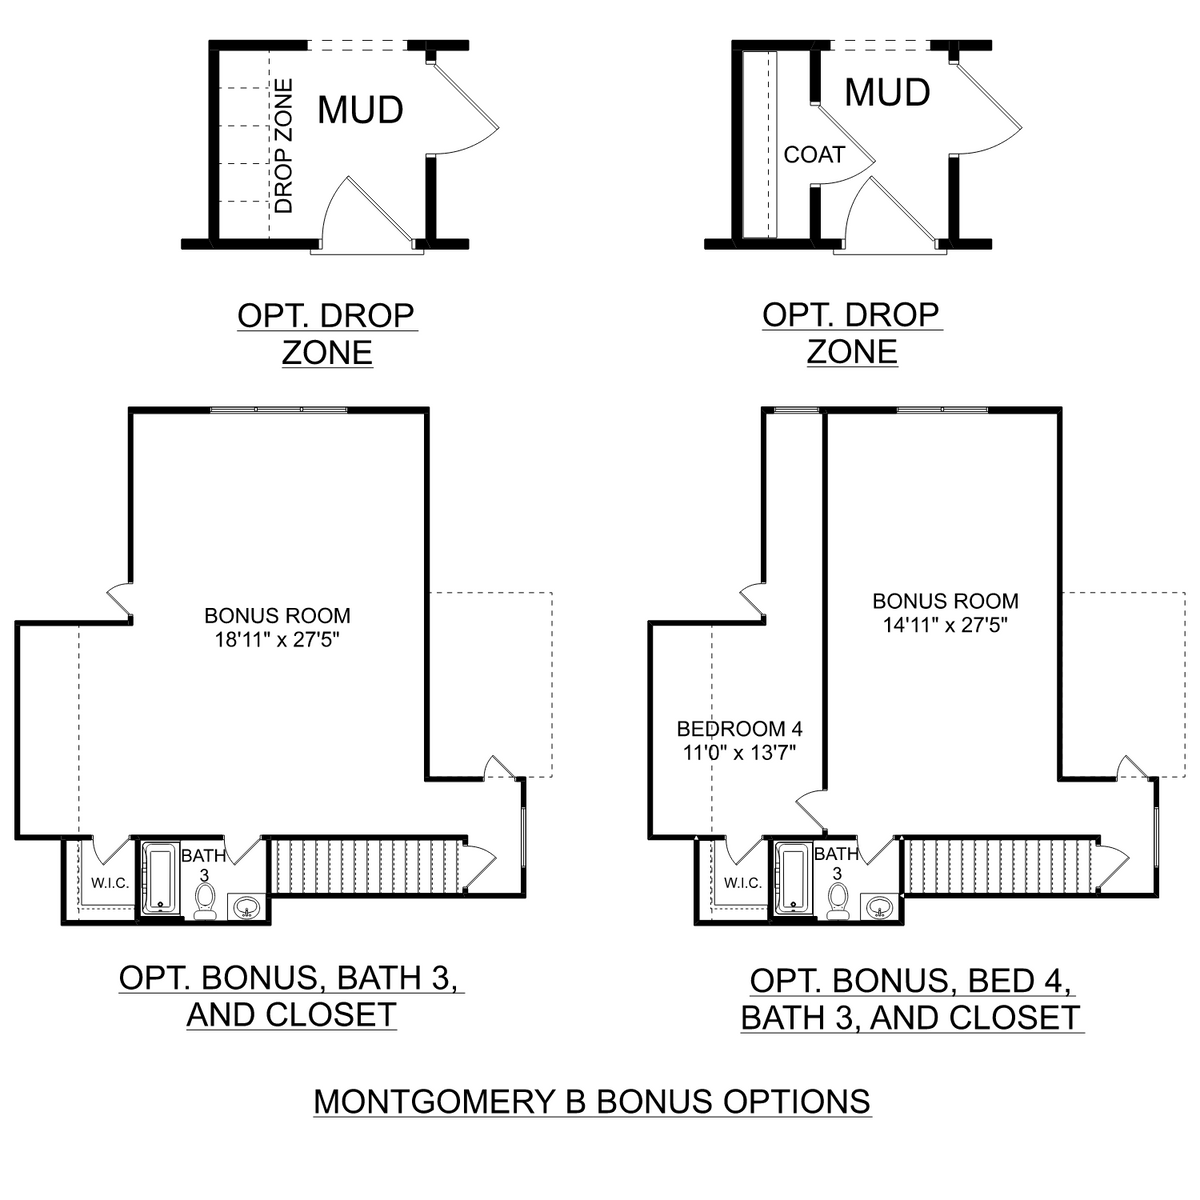 3 - The Montgomery B With Bonus buildable floor plan layout in Davidson Homes' Kendall Downs community.